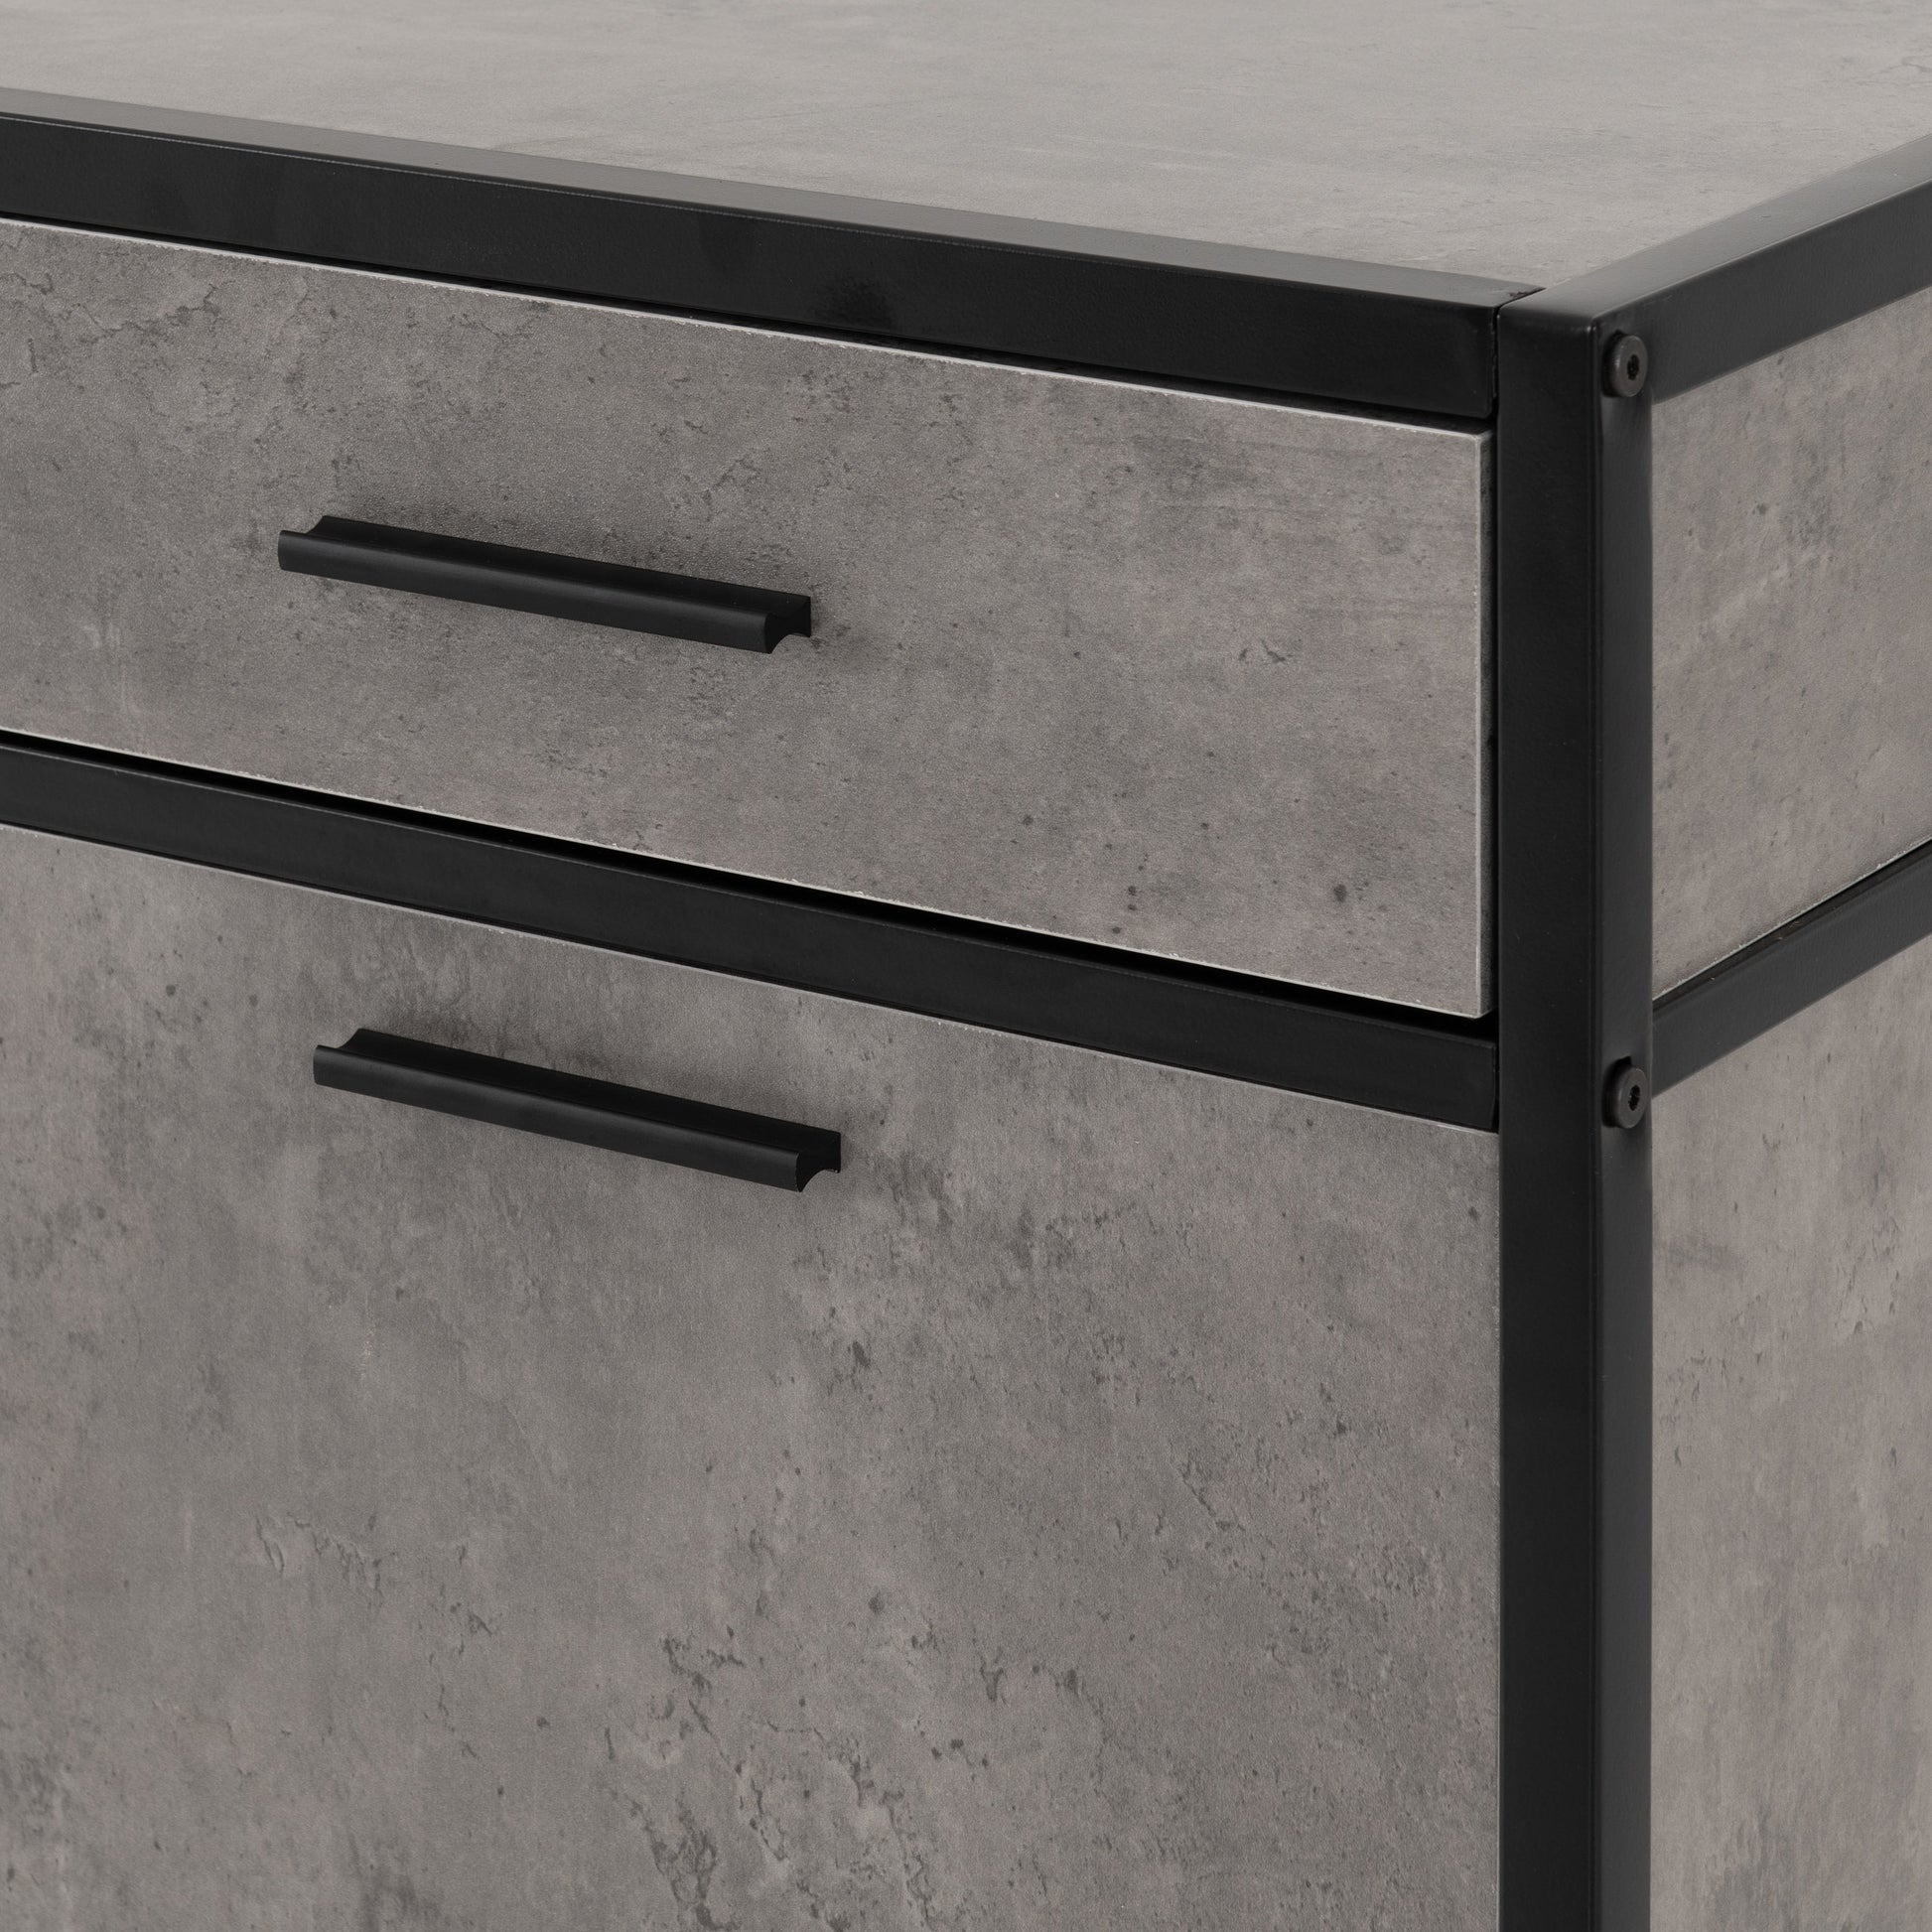 Athens Sideboard- Concrete Effect/Black- The Right Buy Store